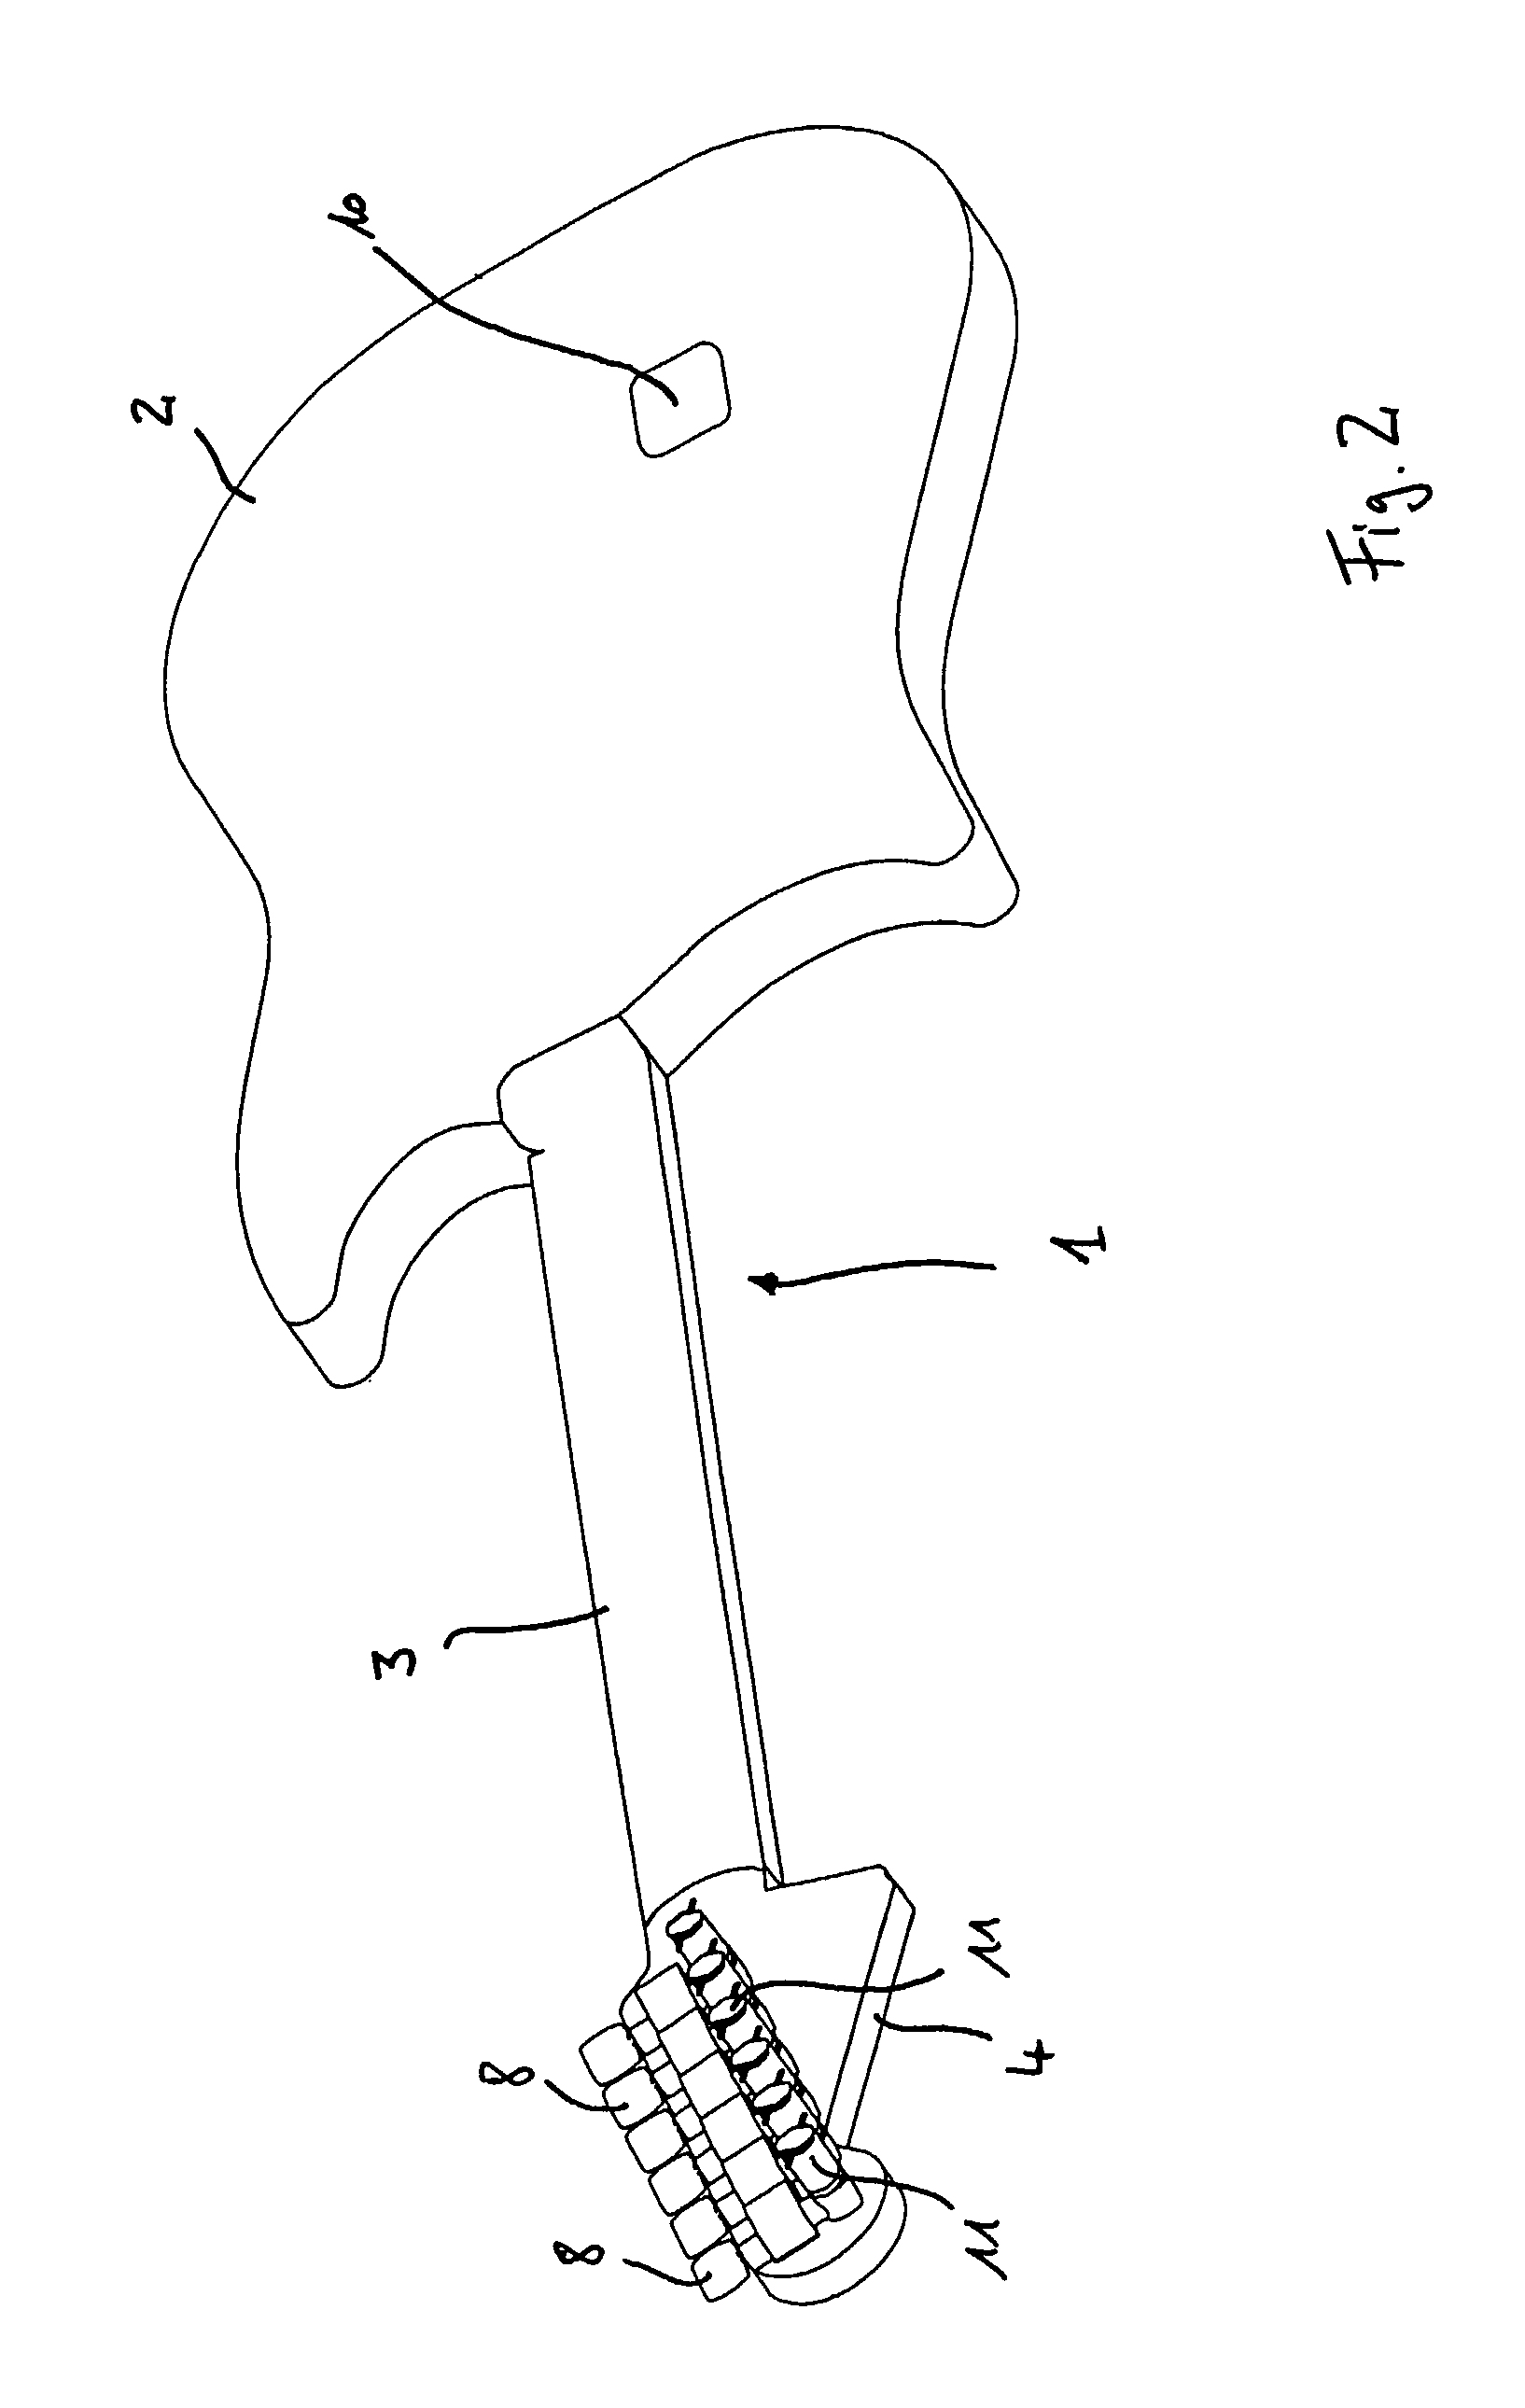 Device for adjusting the tension of the strings of a guitar or of a bass